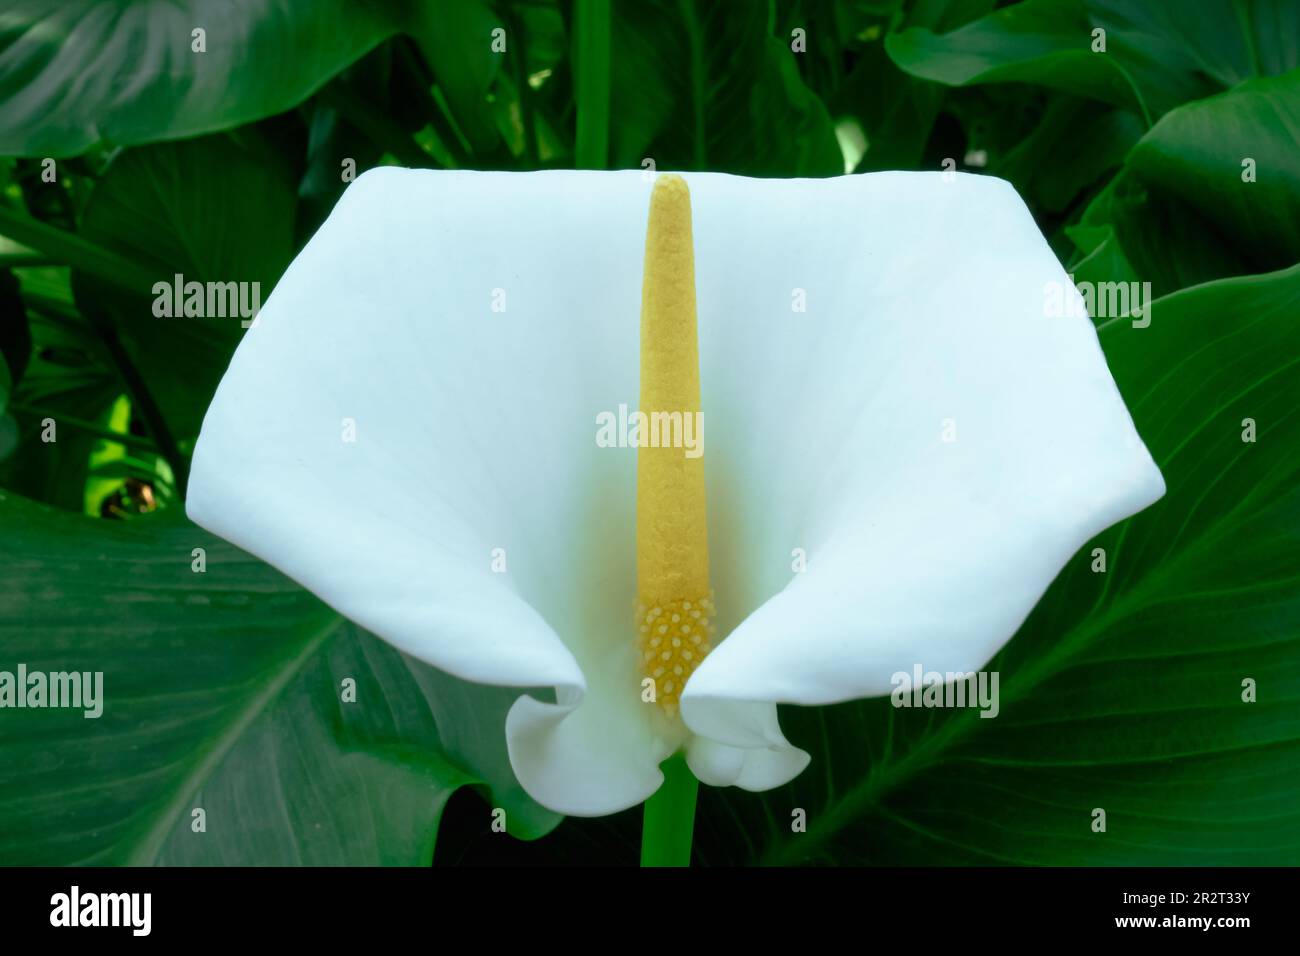 White Calla lily blossoming in the center of lush green foliage Stock Photo